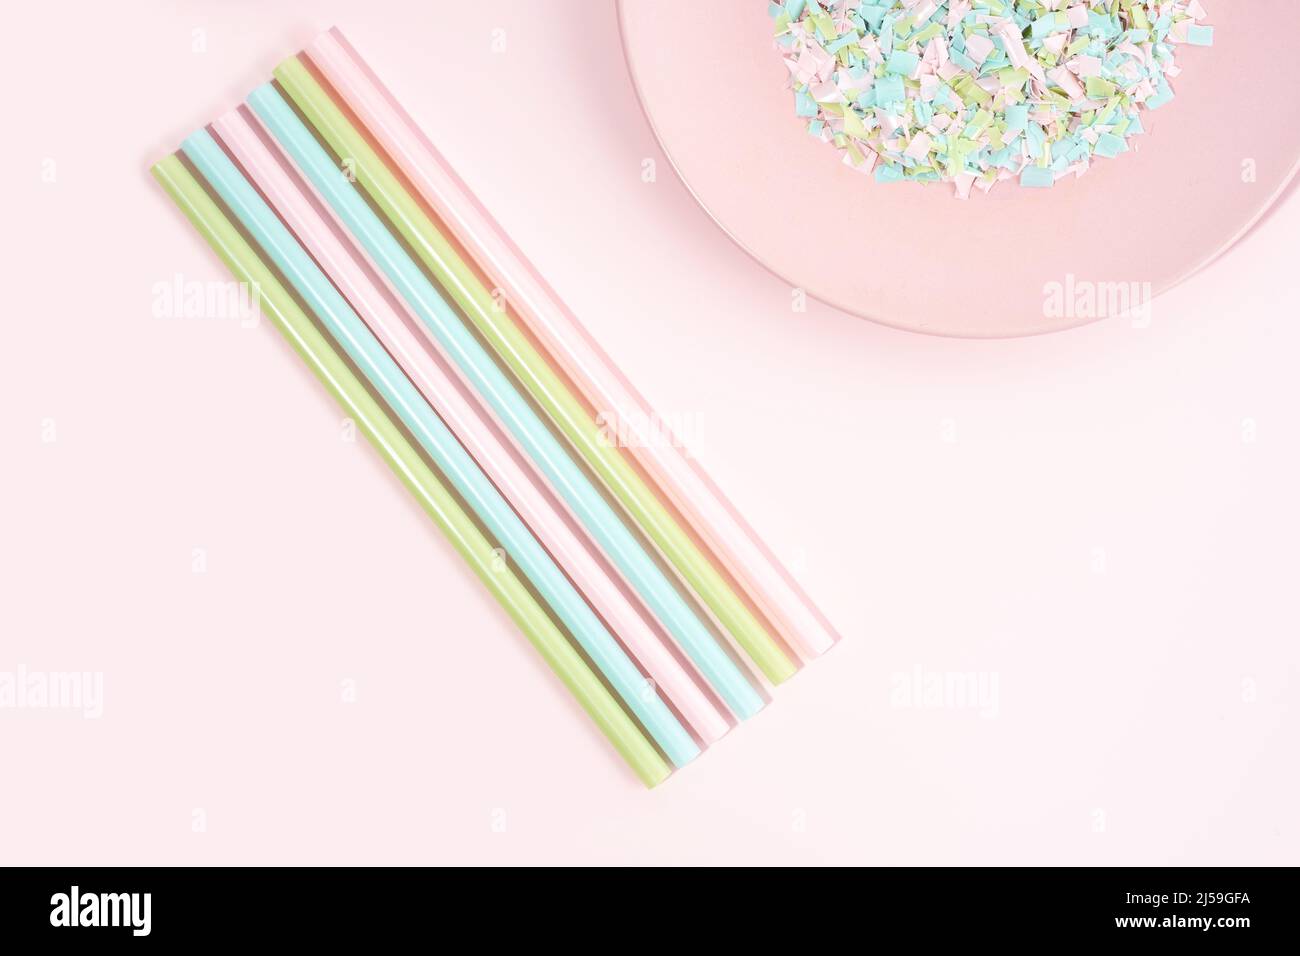 Drinking straws and plate full of microplastics on a pink background. Impact of micro plastic on the food chain. The idea of micro plastic pollution. Stock Photo